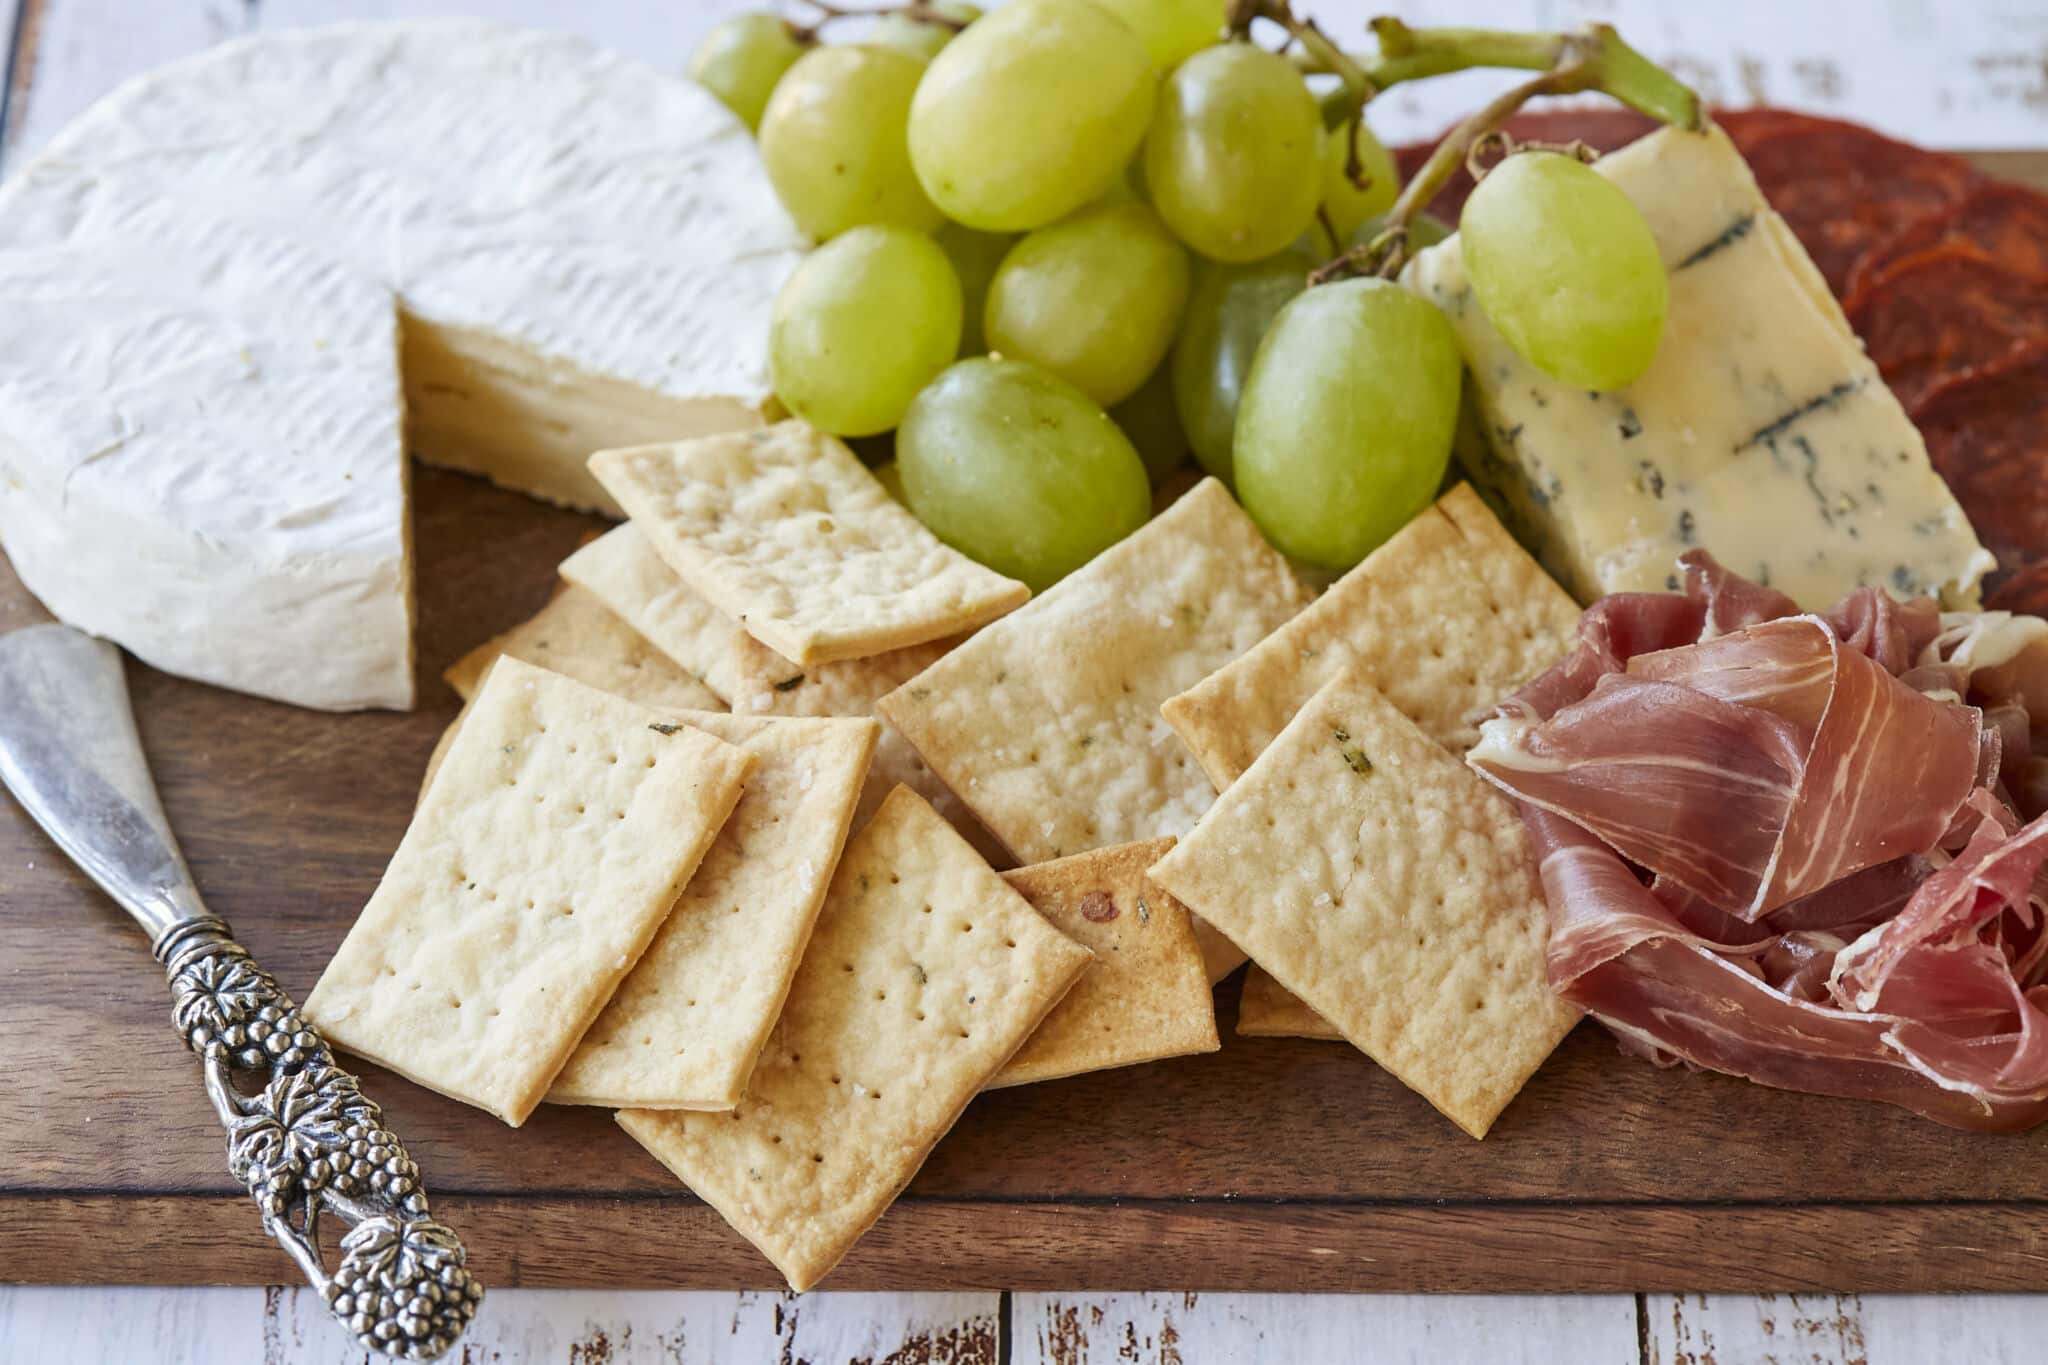 Homemade Sourdough Crackers are served on a charcuterie board with green grapes, prosciutto, cheese and salami.